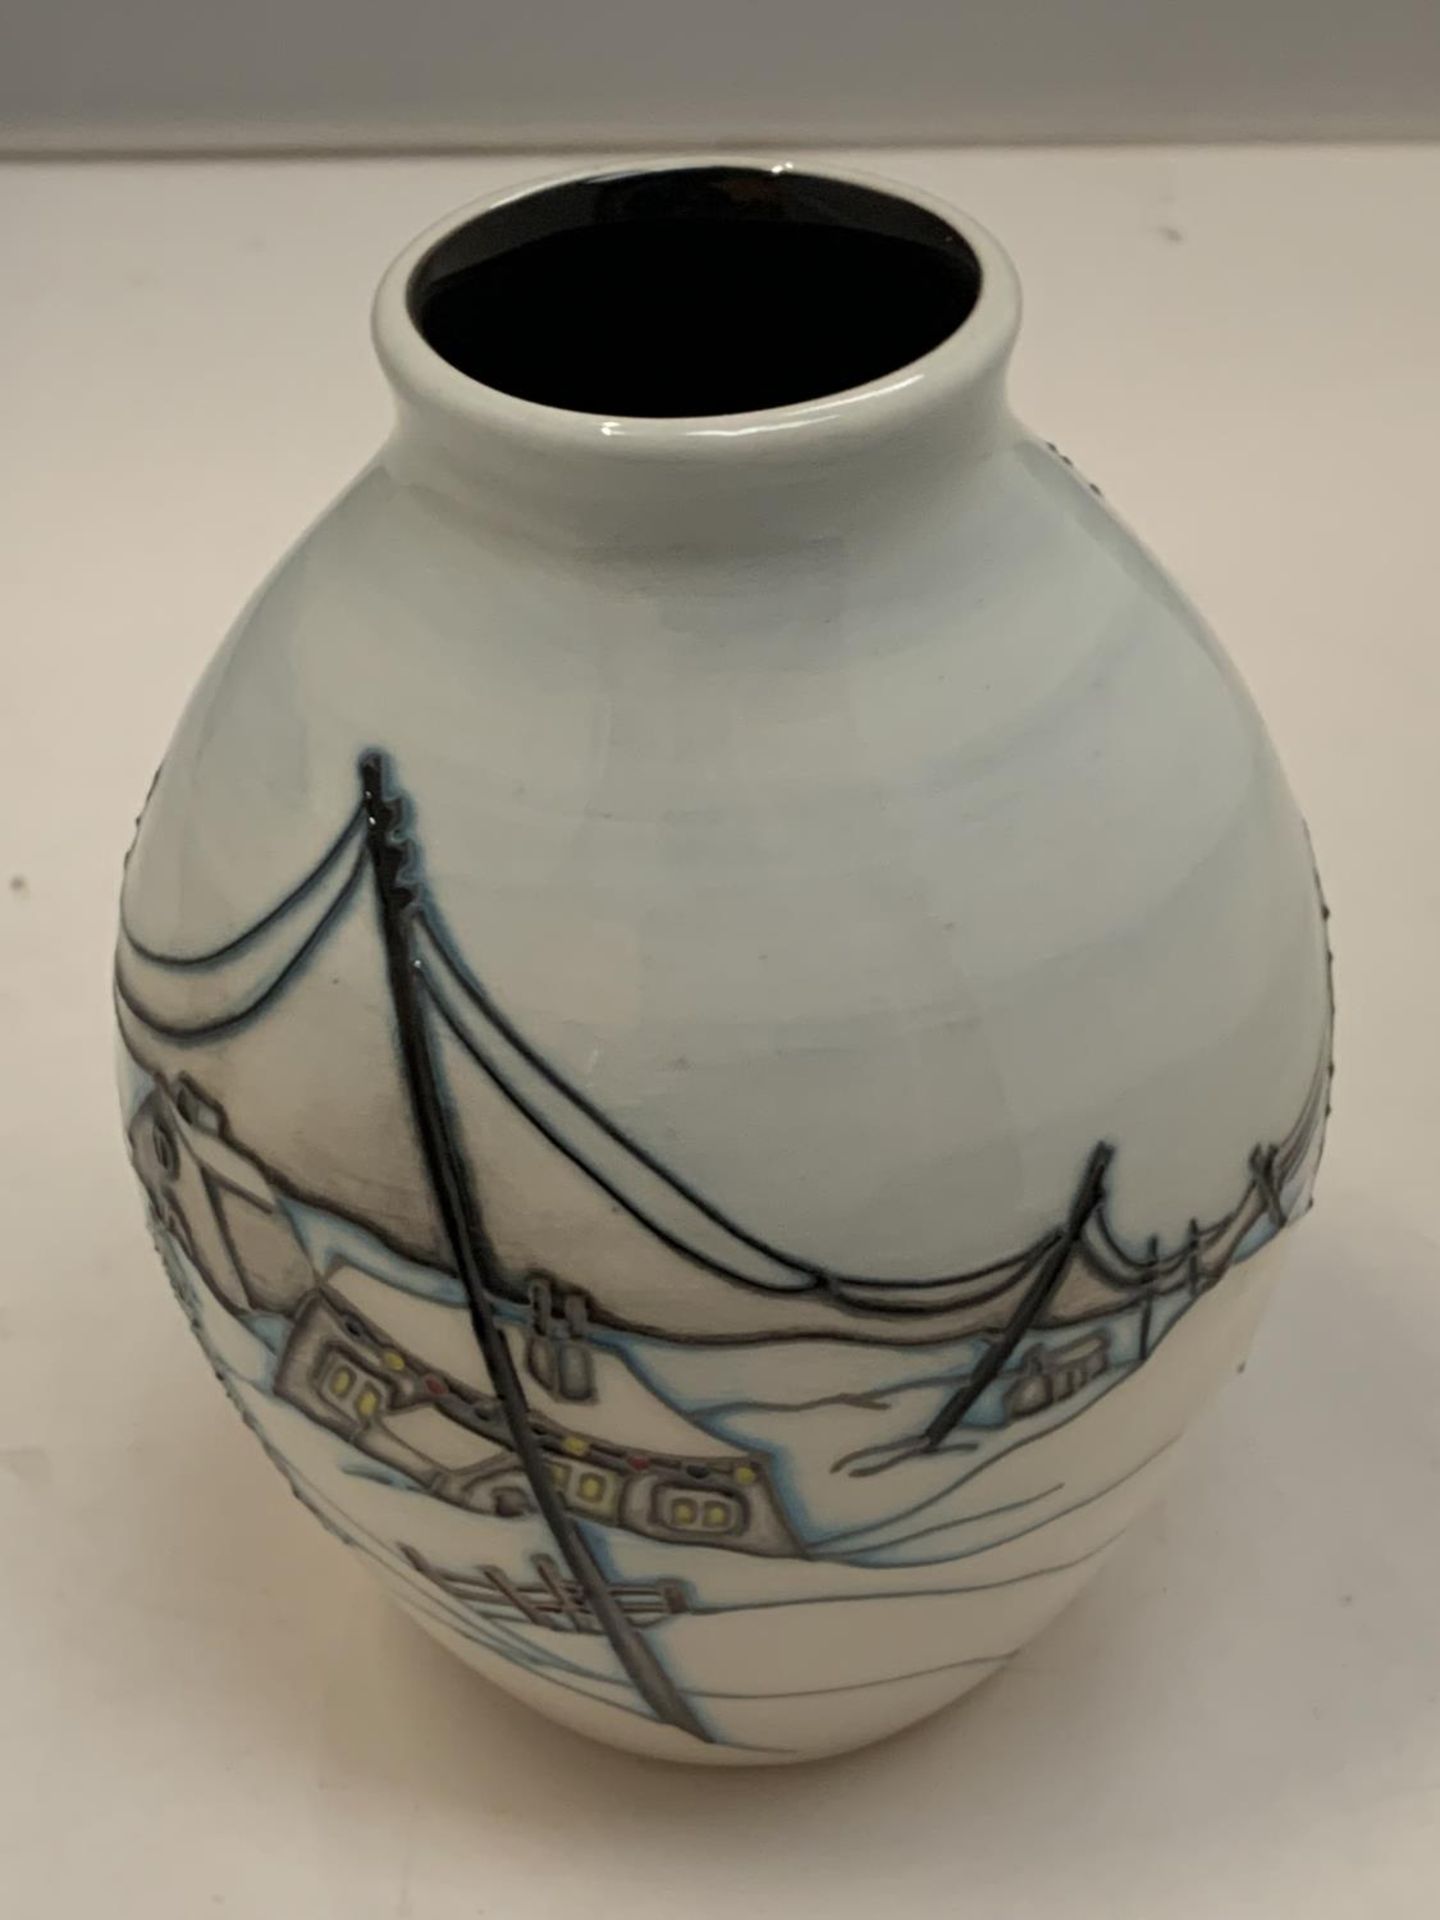 A MOORCROFT HOME FOR CHRISTMAS VASE 5 INCHES TALL - Image 2 of 4